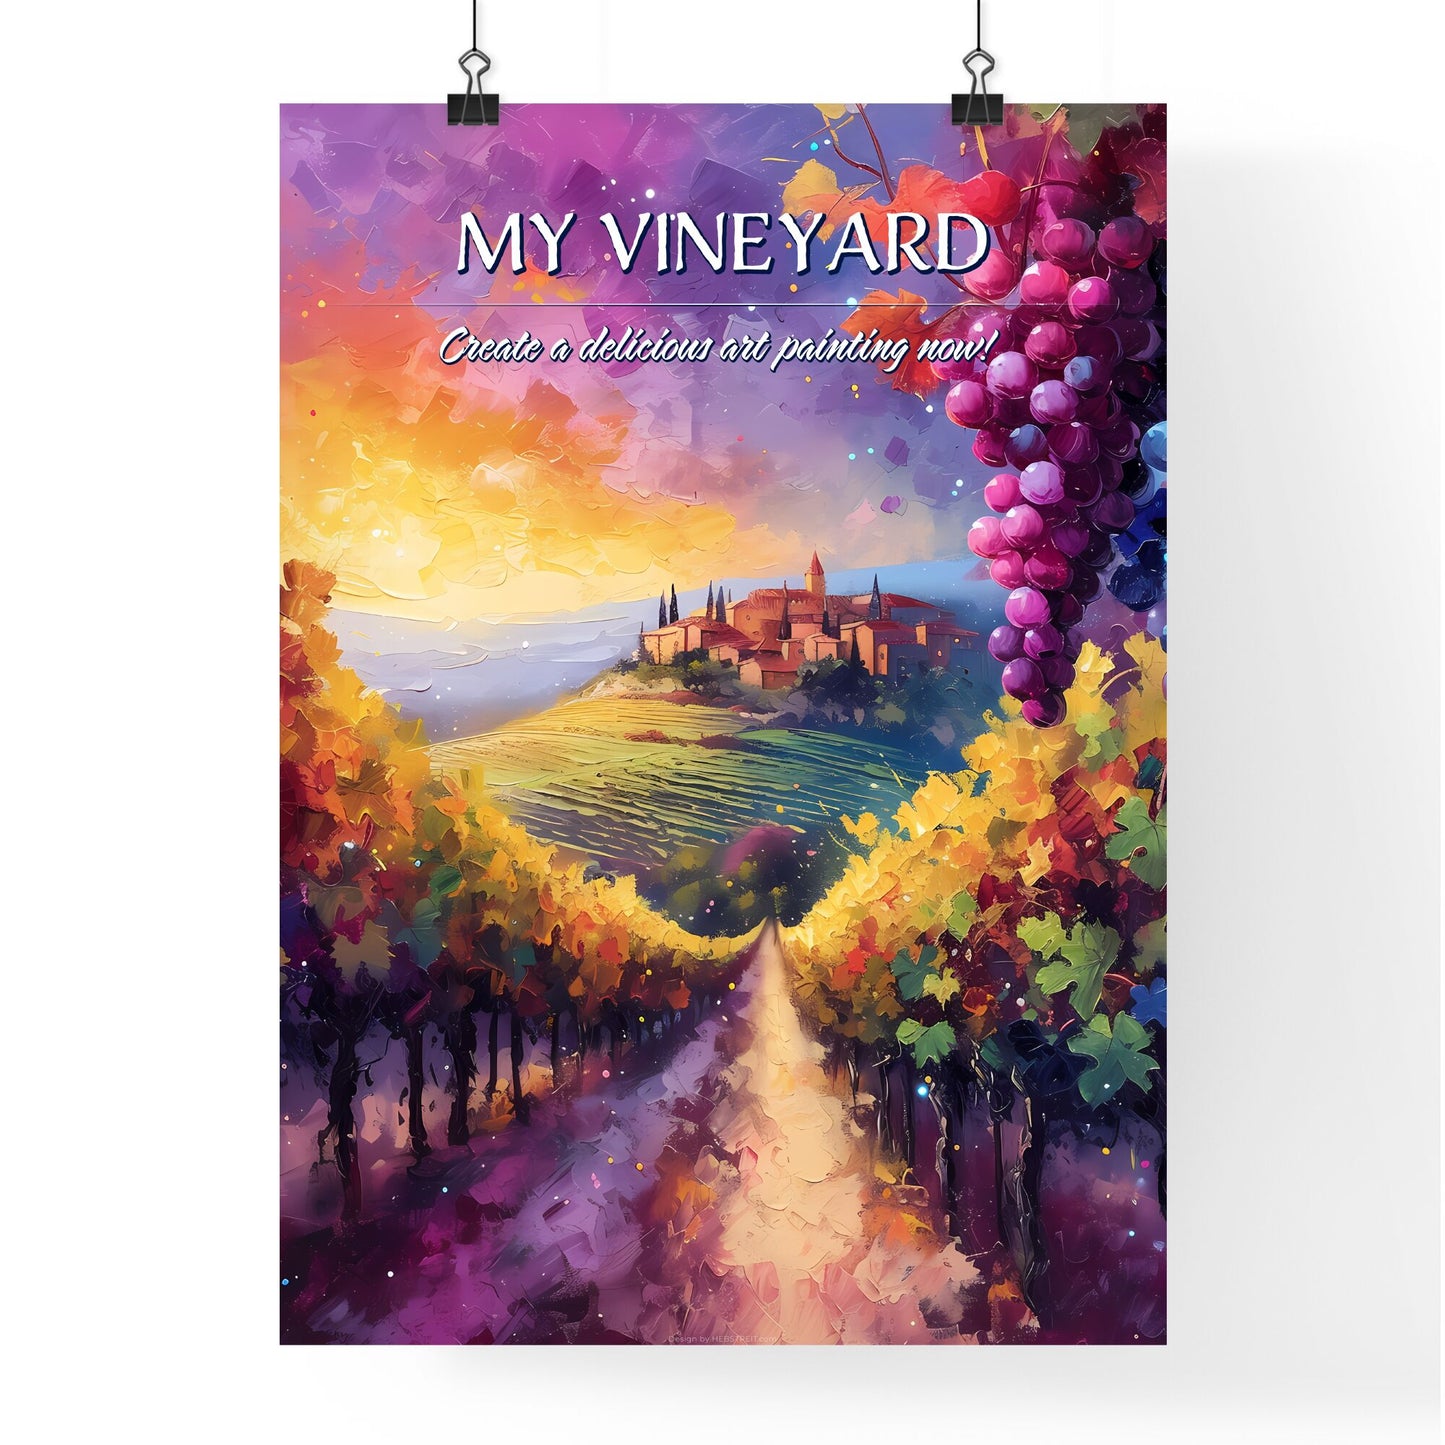 MY VINEYARD – Create a delicious art painting now!